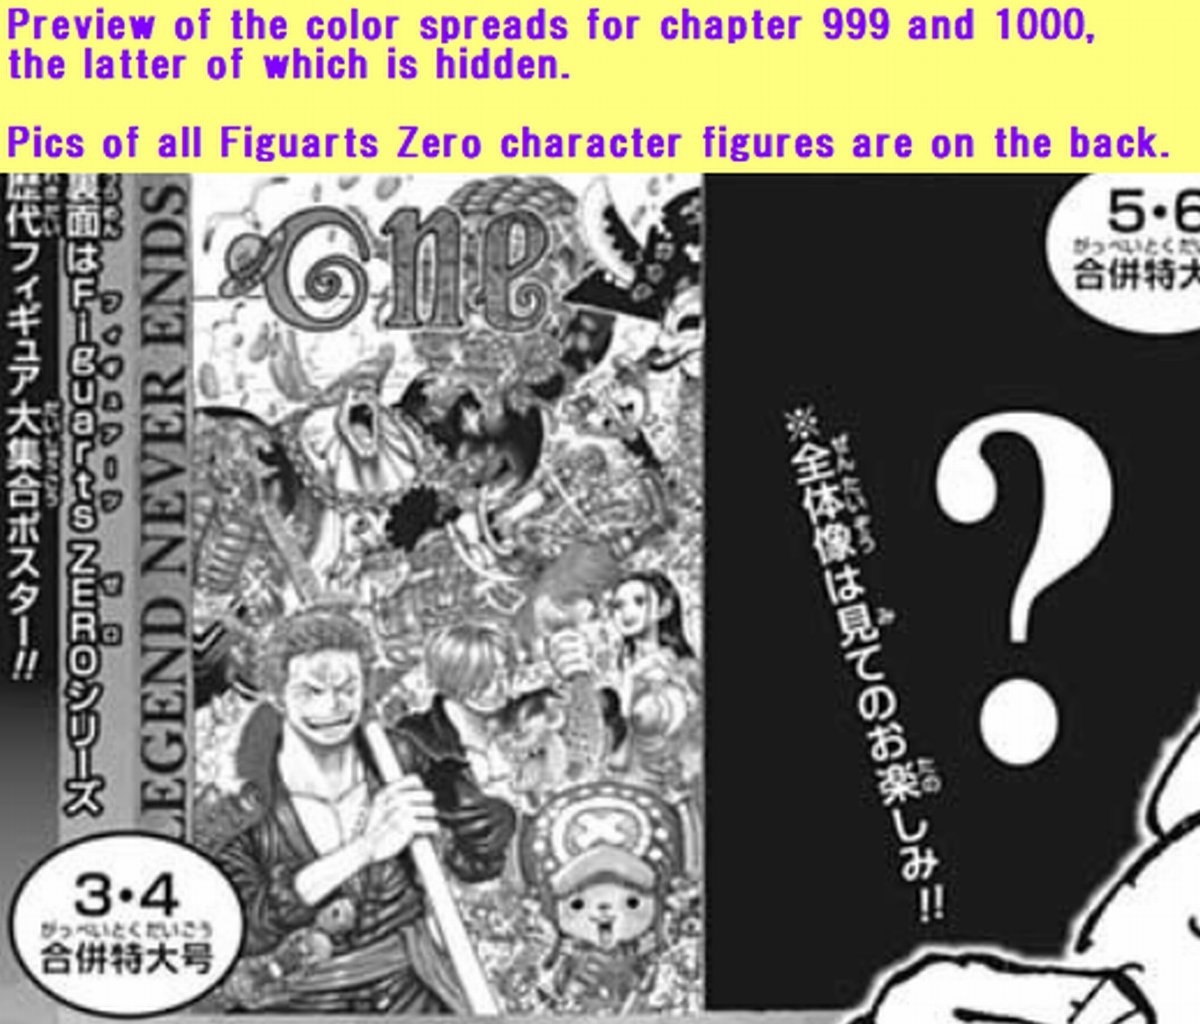 Sandman 在twitter 上 Both One Piece Color Spreads And Jump Cover Pages For Chapter 999 And 1000 Can Be Combined Current Jump Mangakas Draw Many Op Characters In The Covers The Combined